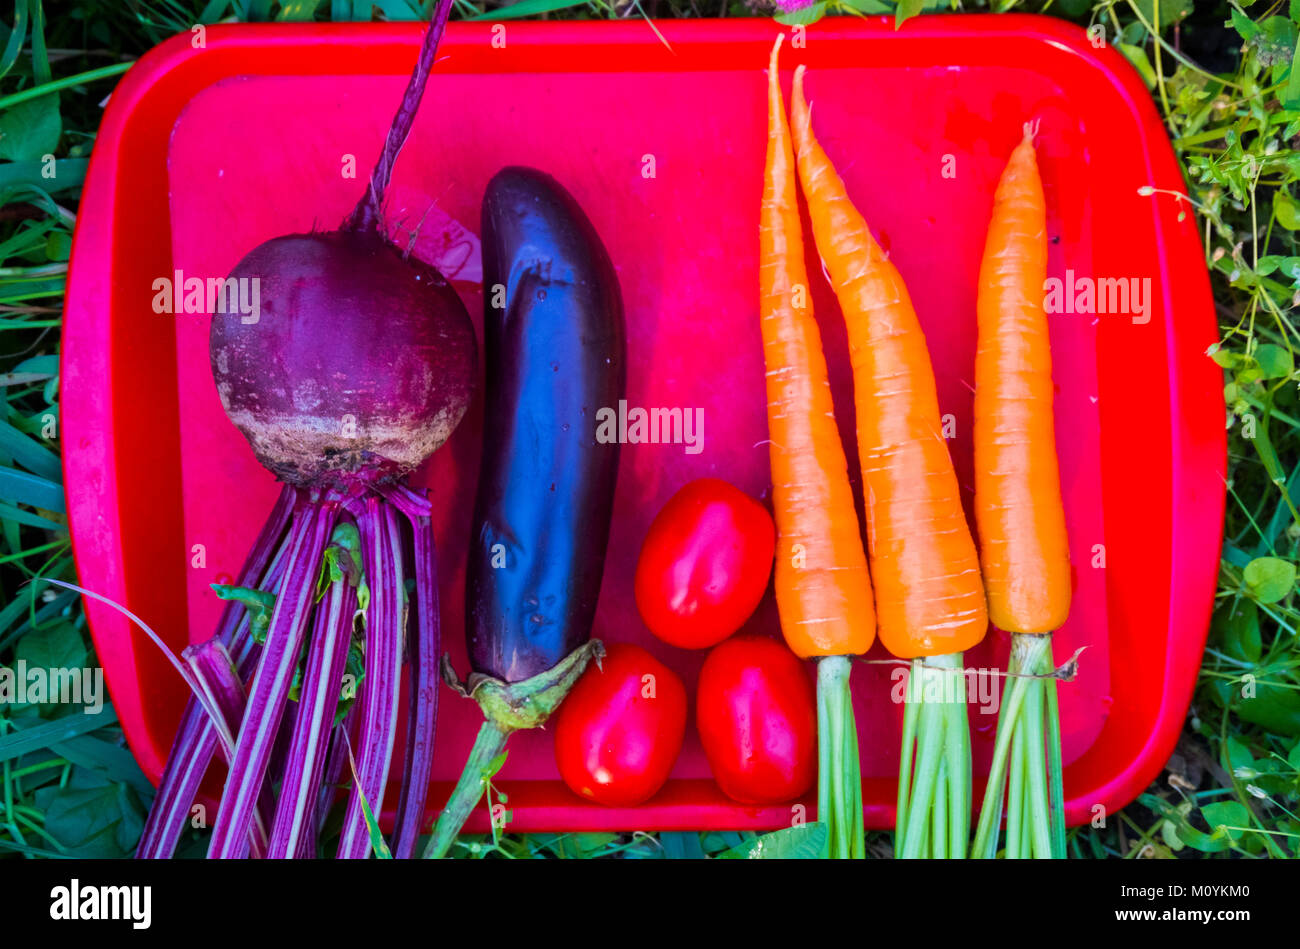 Organic vegetables on tray Stock Photo